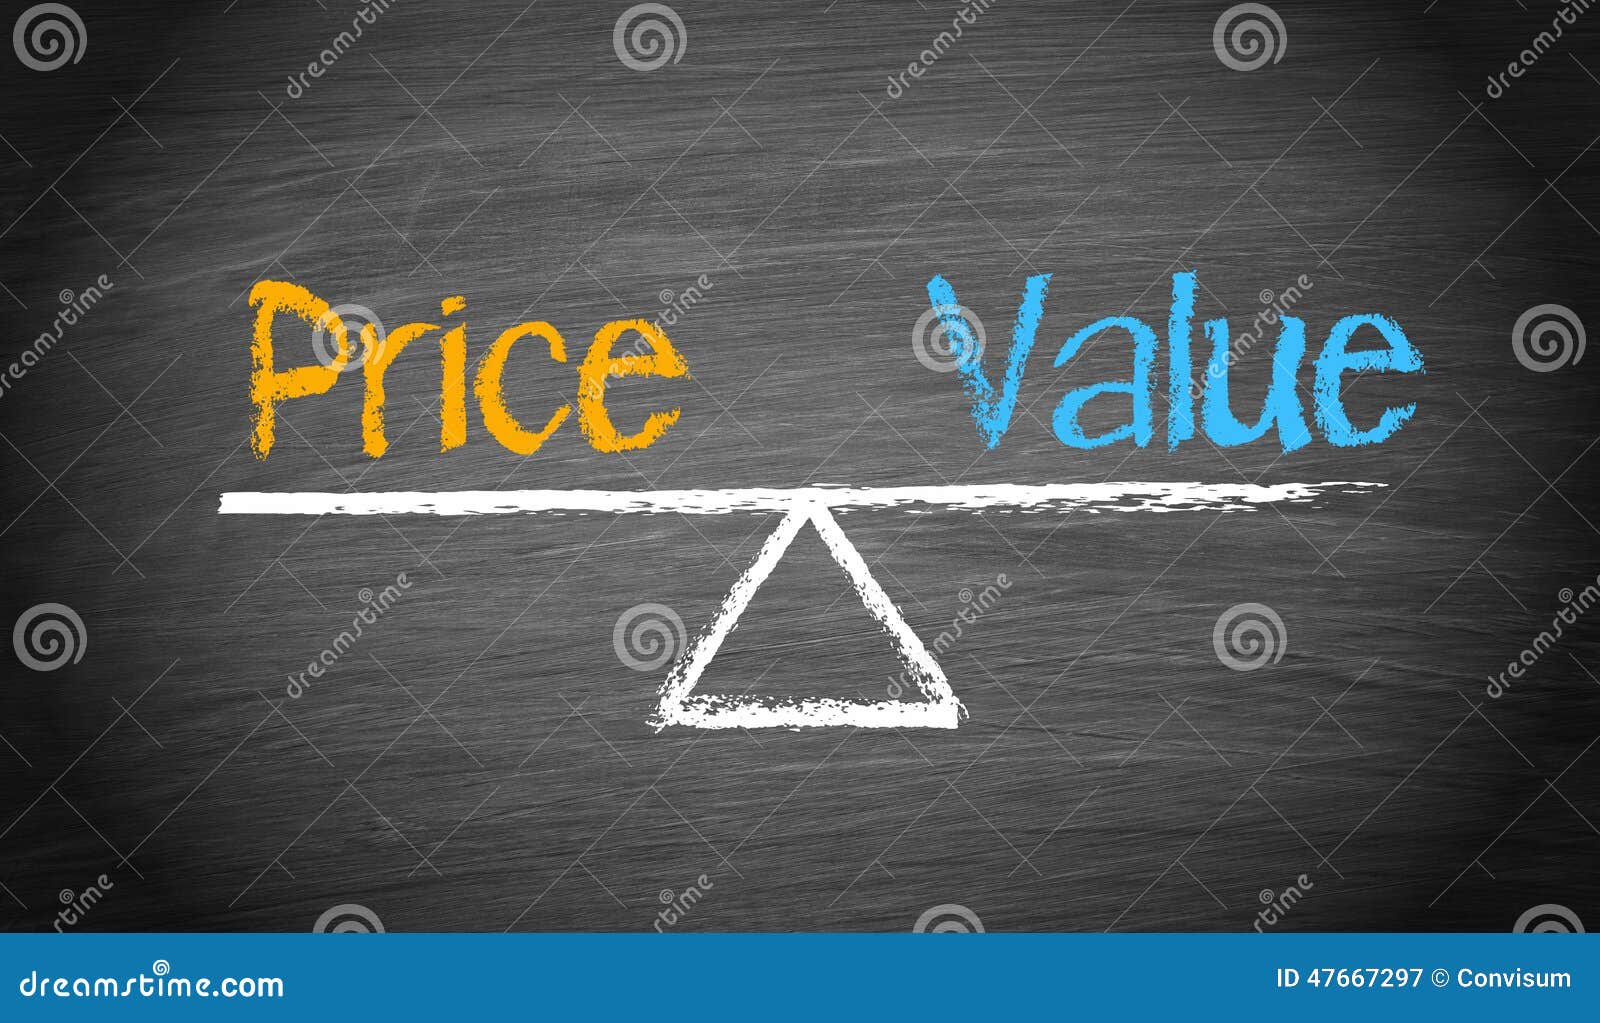 price and value business concept